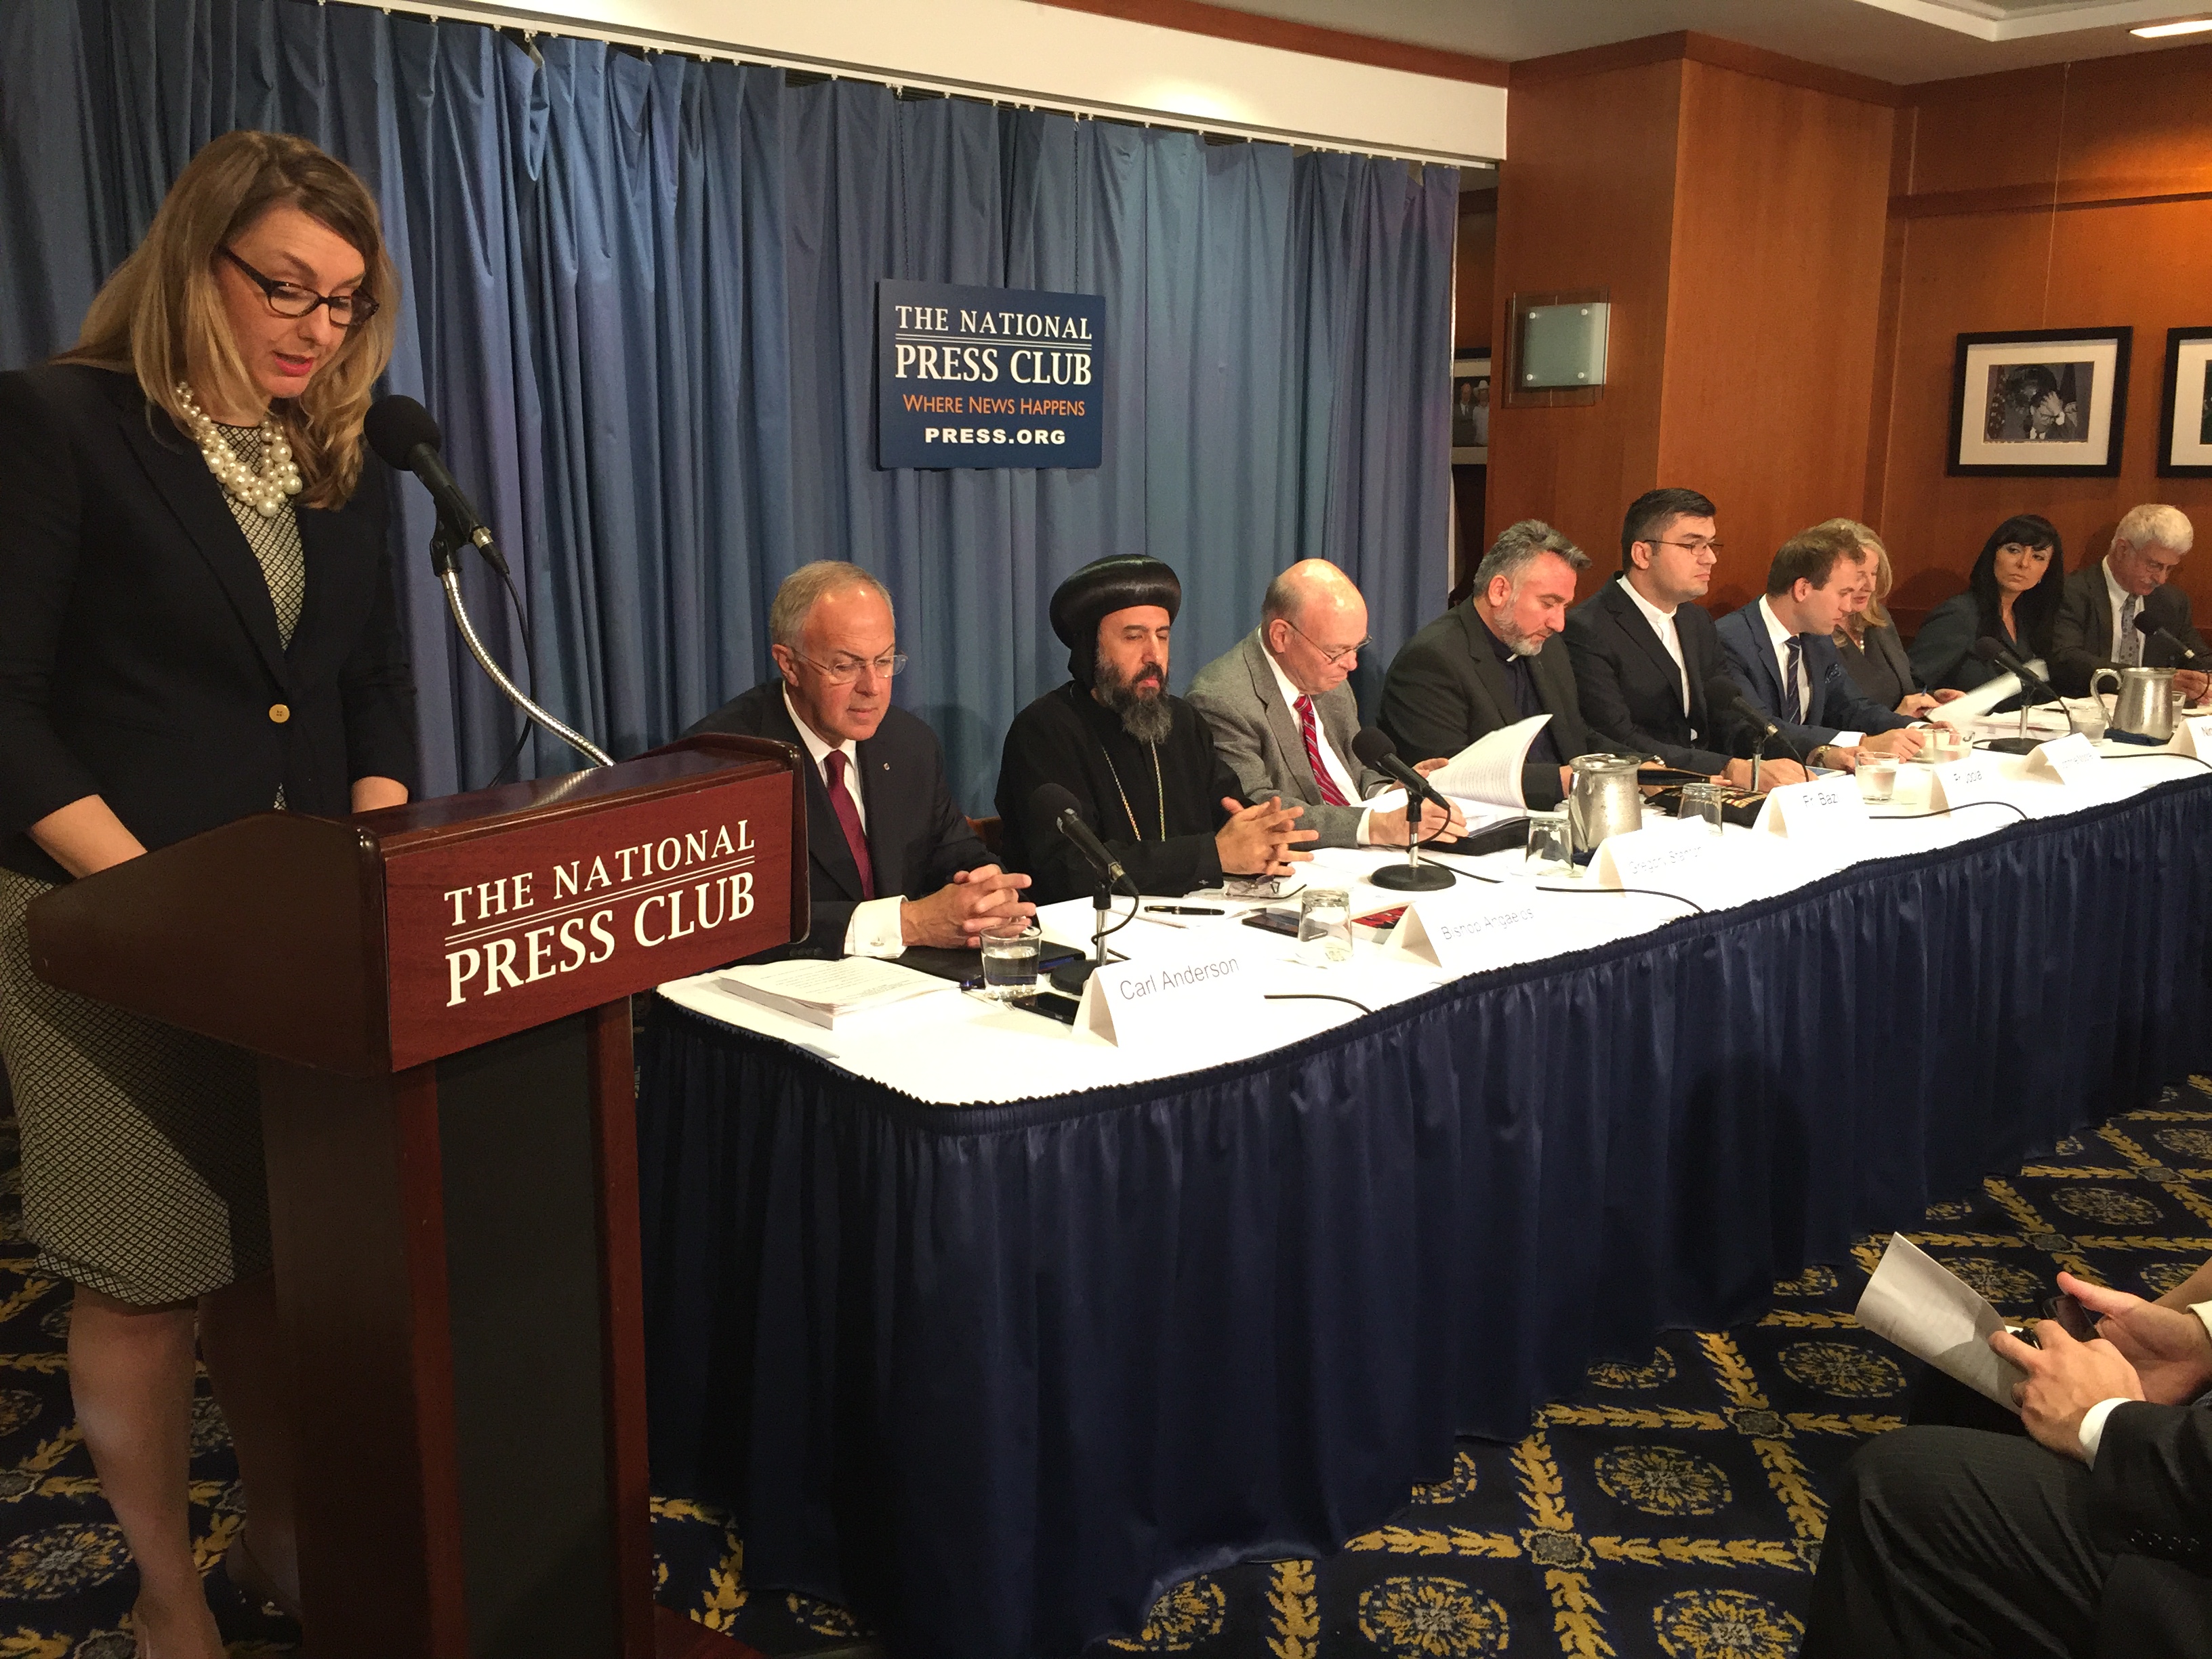 Kirsten Evans IDC Executive Director; Carl Anderson, Knights of Columbus CEO; Bishop Anba Angaelos, Coptic Orthodox Church in the United Kingdom; Prof. Gregory Stanton, Founding President, Genocide Wa